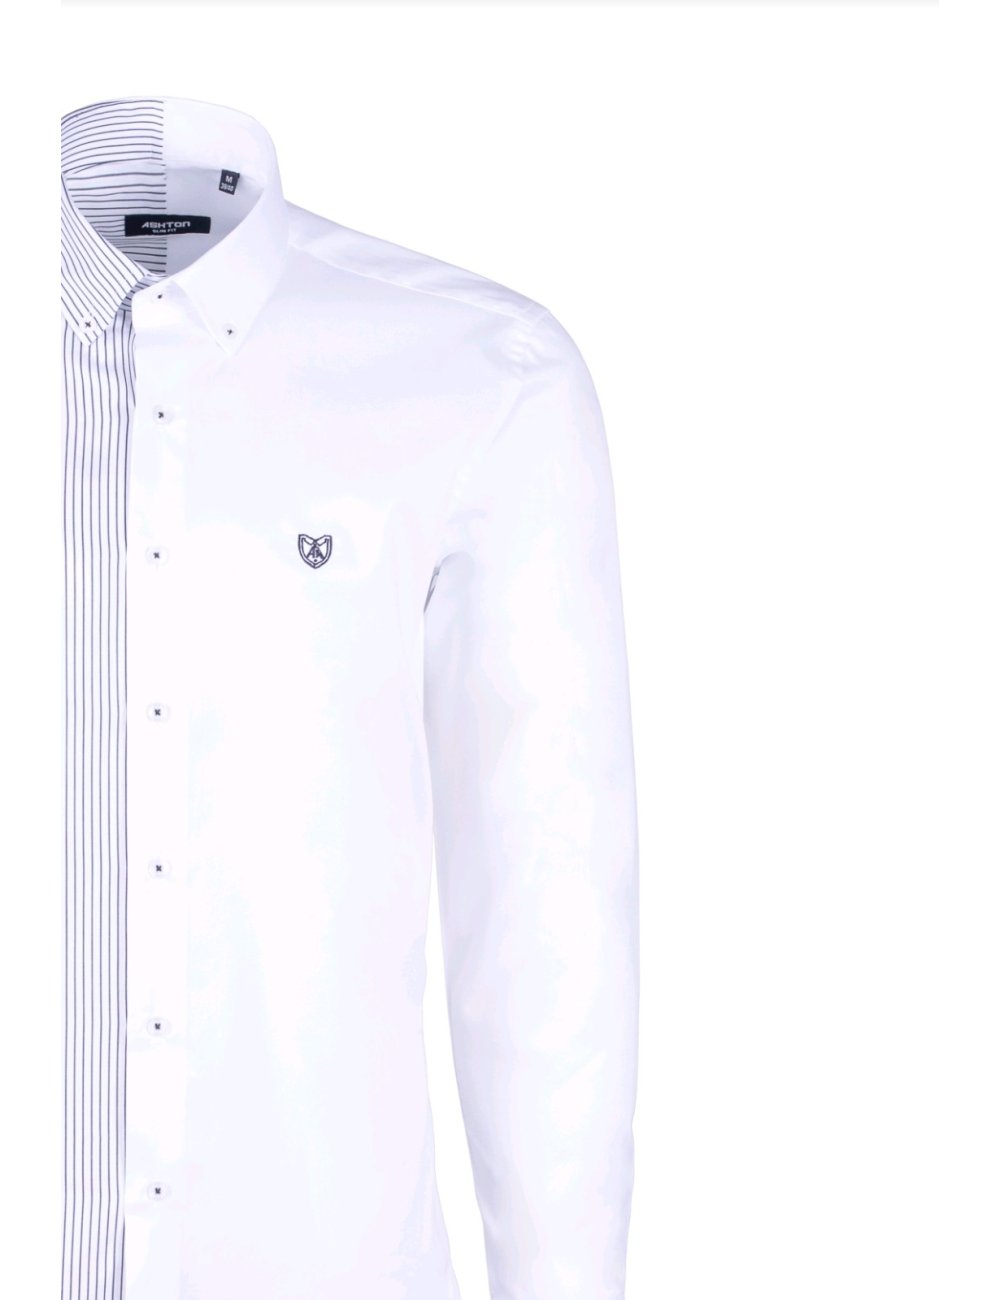 Chemise blanche/marine face